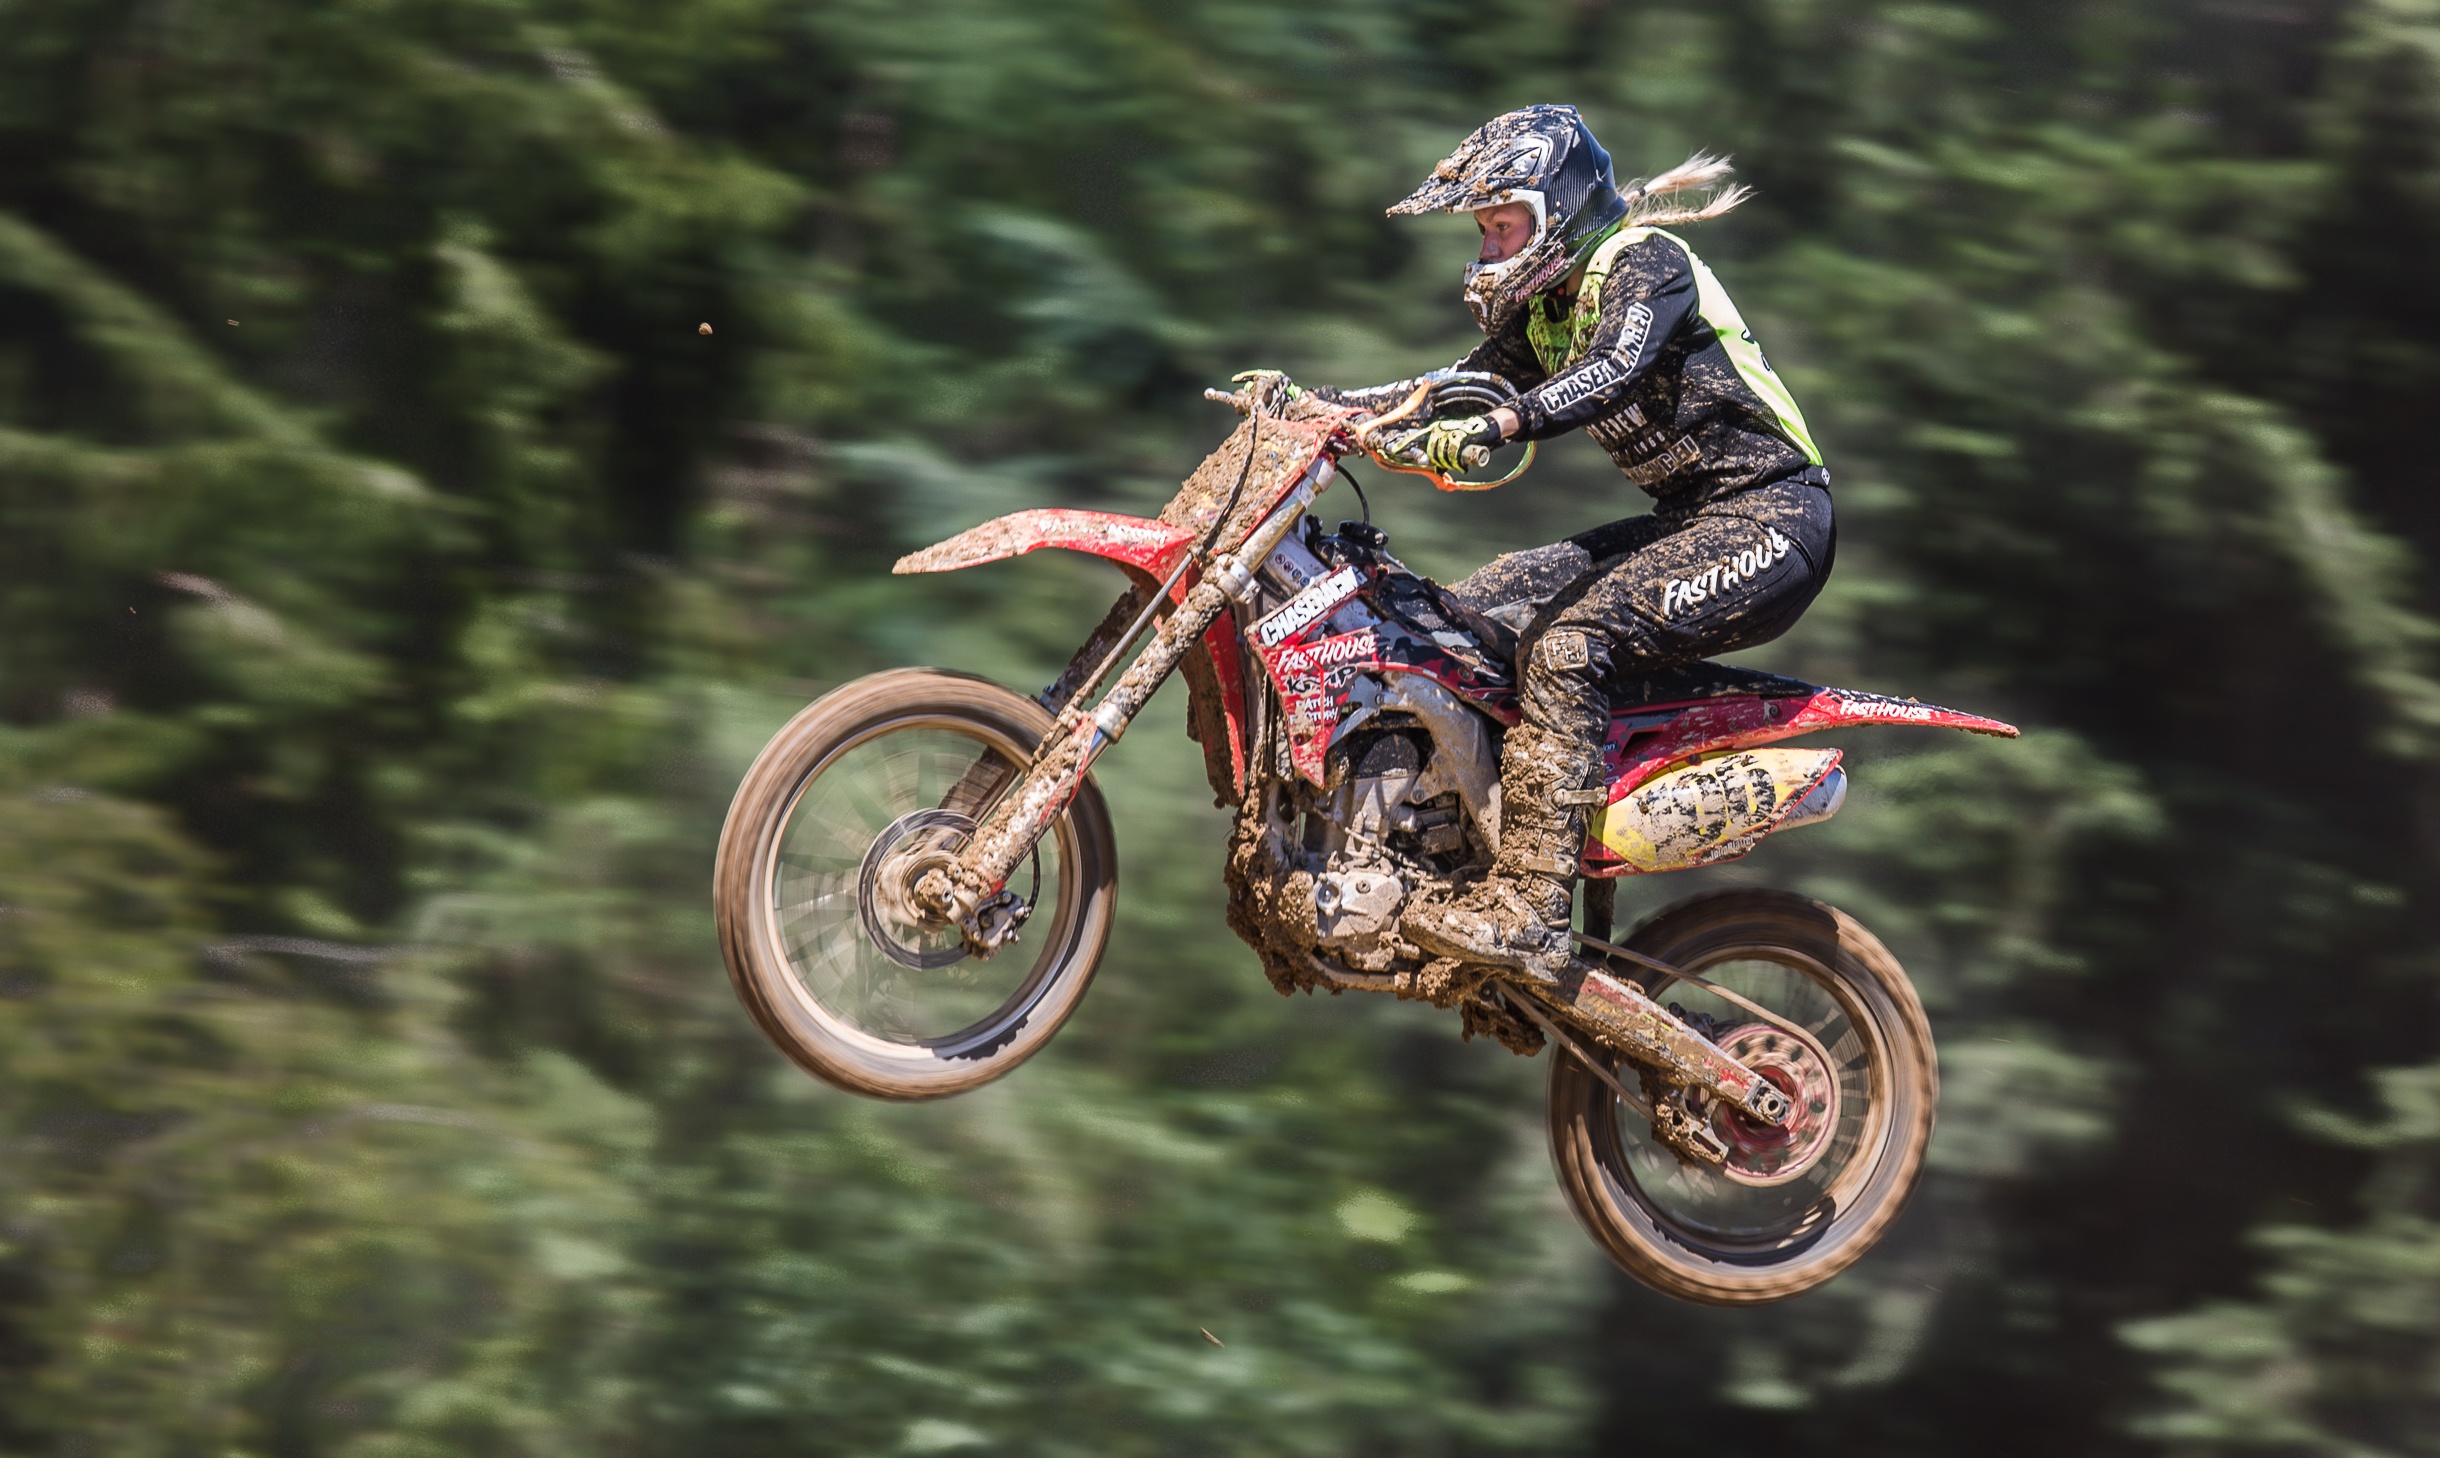 Motocross Full HD Wallpaper And Background Image 2440x1458 ID852398